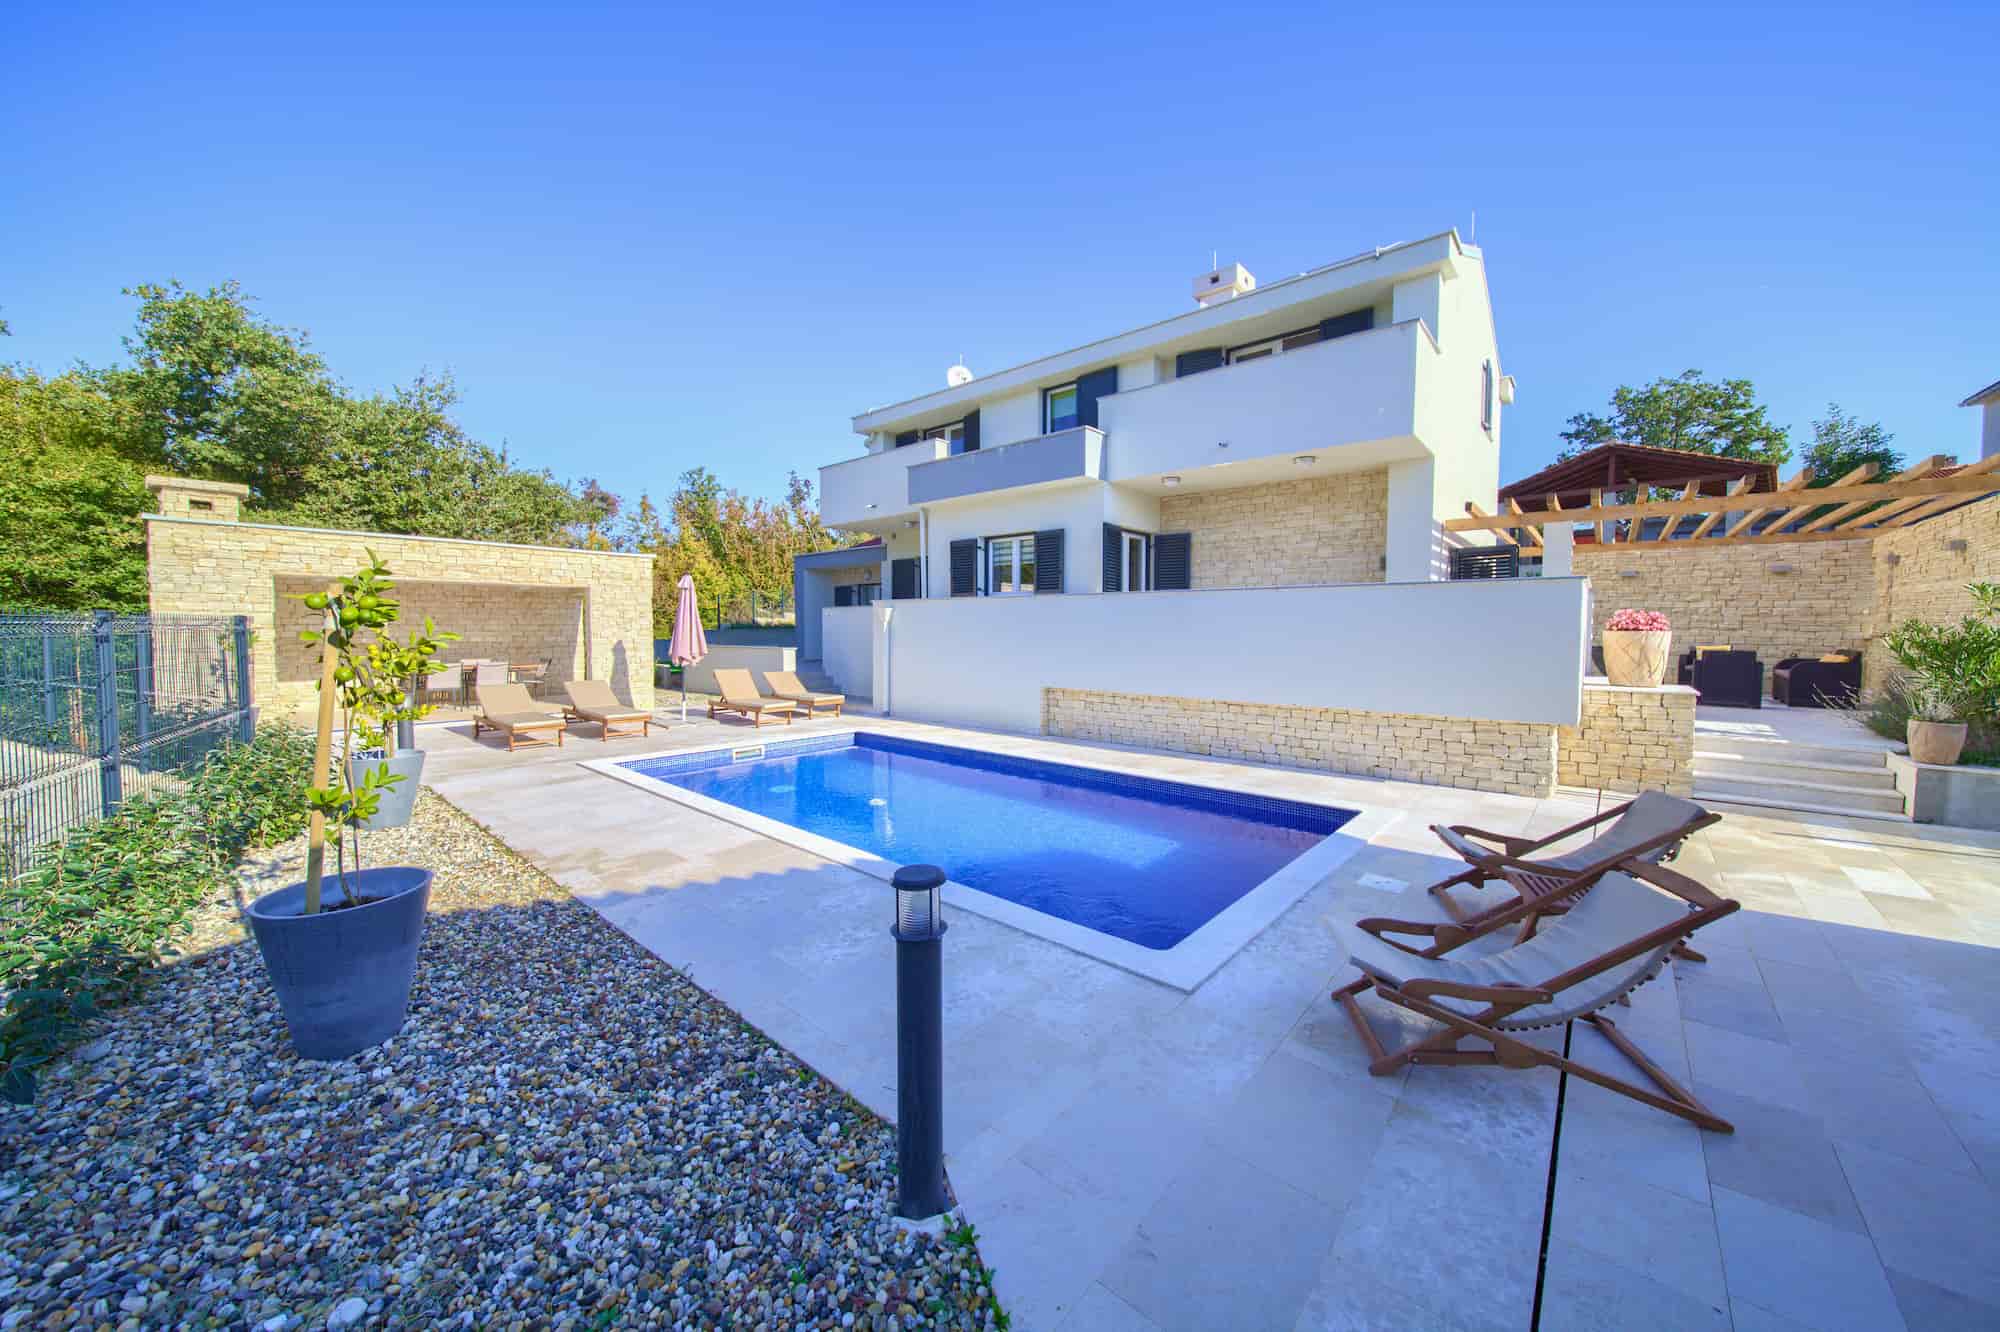 Villa with swimming pool near the sandy beach, quiet area